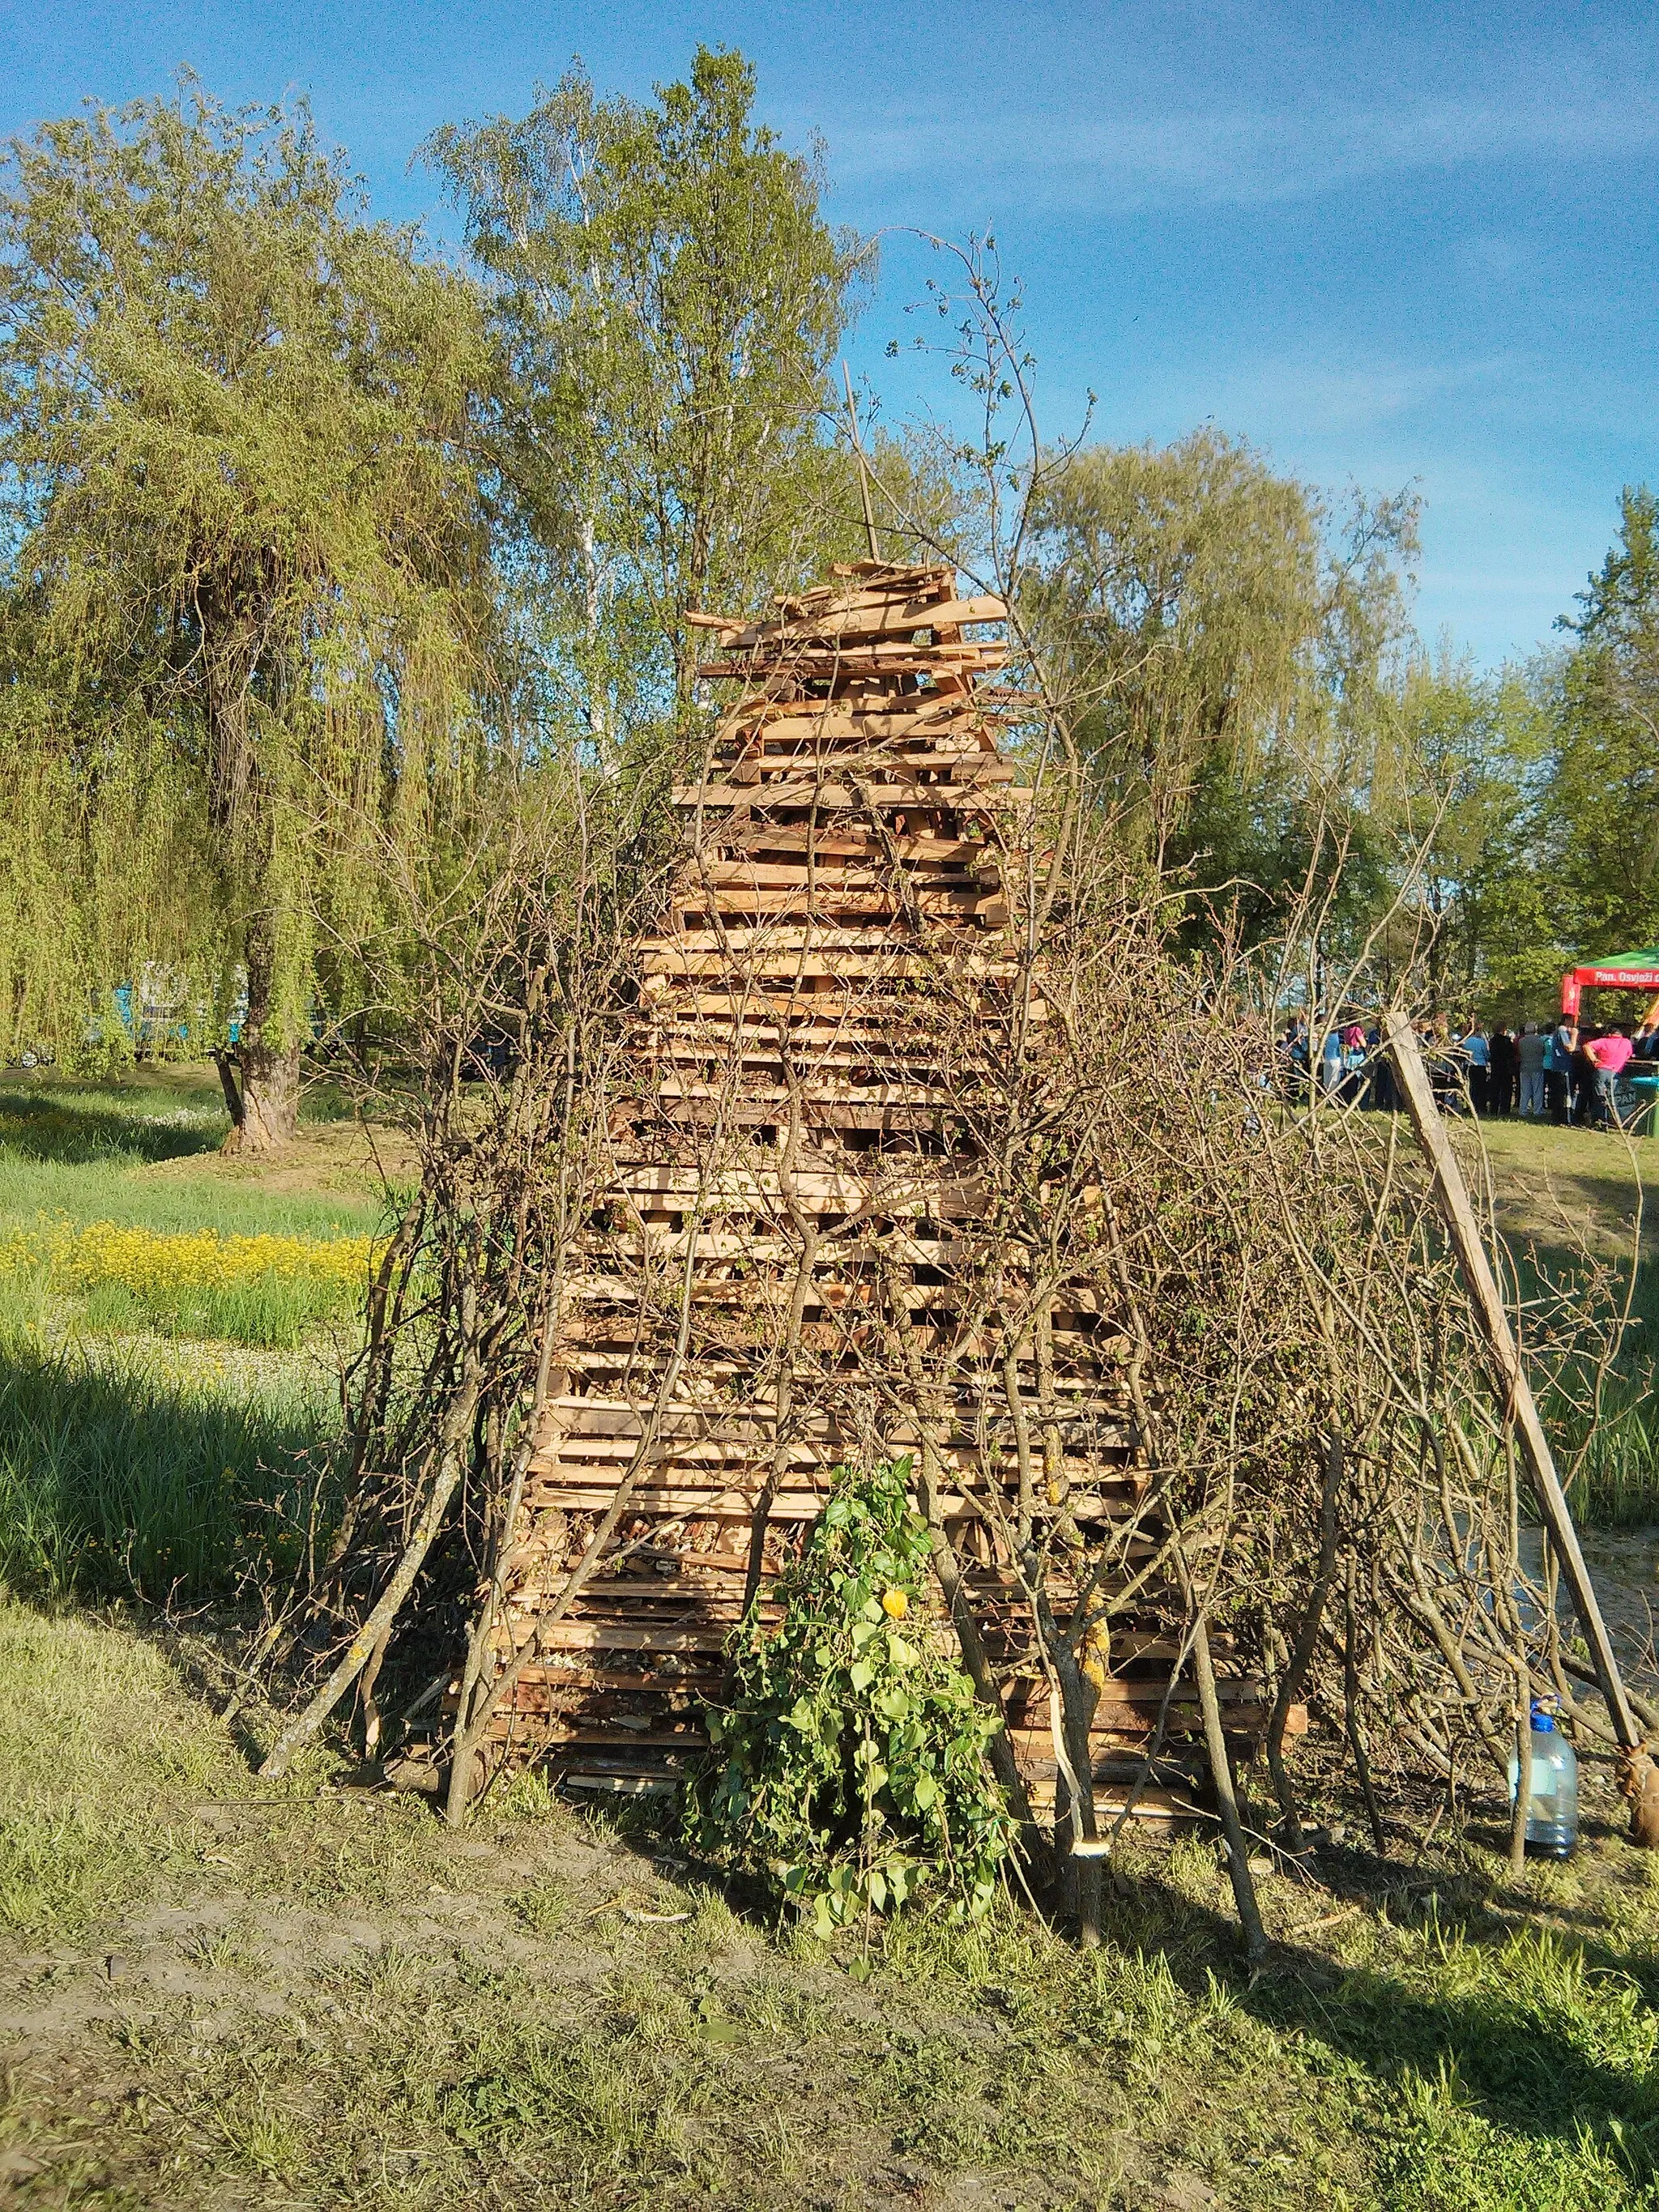 Photo showing: Bonfire at the Old Town of Lukavec